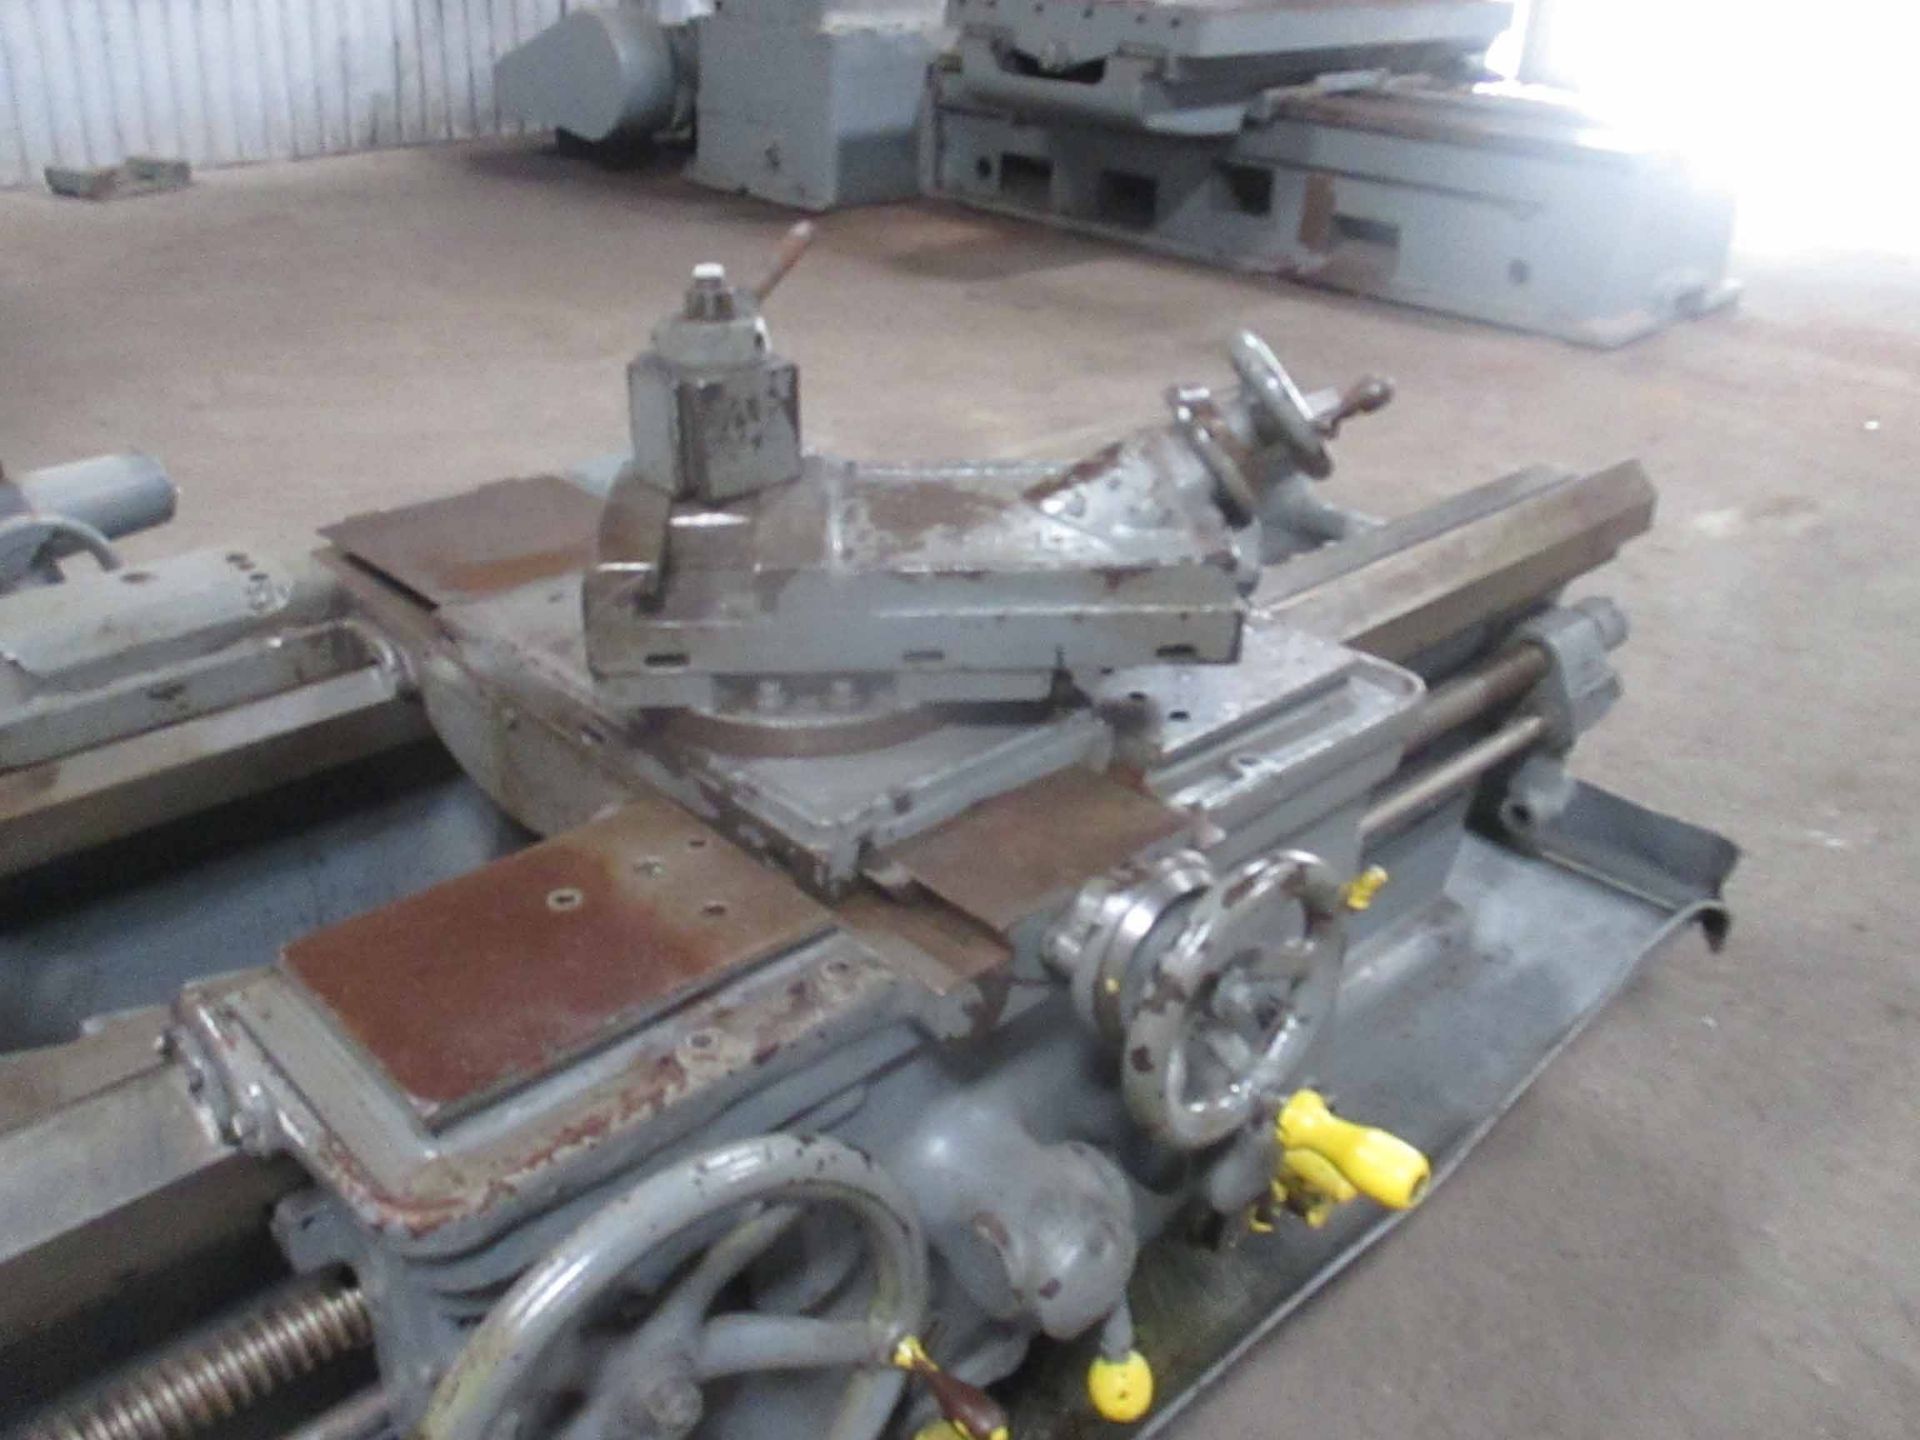 ENGINE LATHE, AXELSON MDL. 25, spds: 6-555 RPM, 24" dia. 4-jaw chuck, 72" centers, 28-3/4" sw. - Image 4 of 5